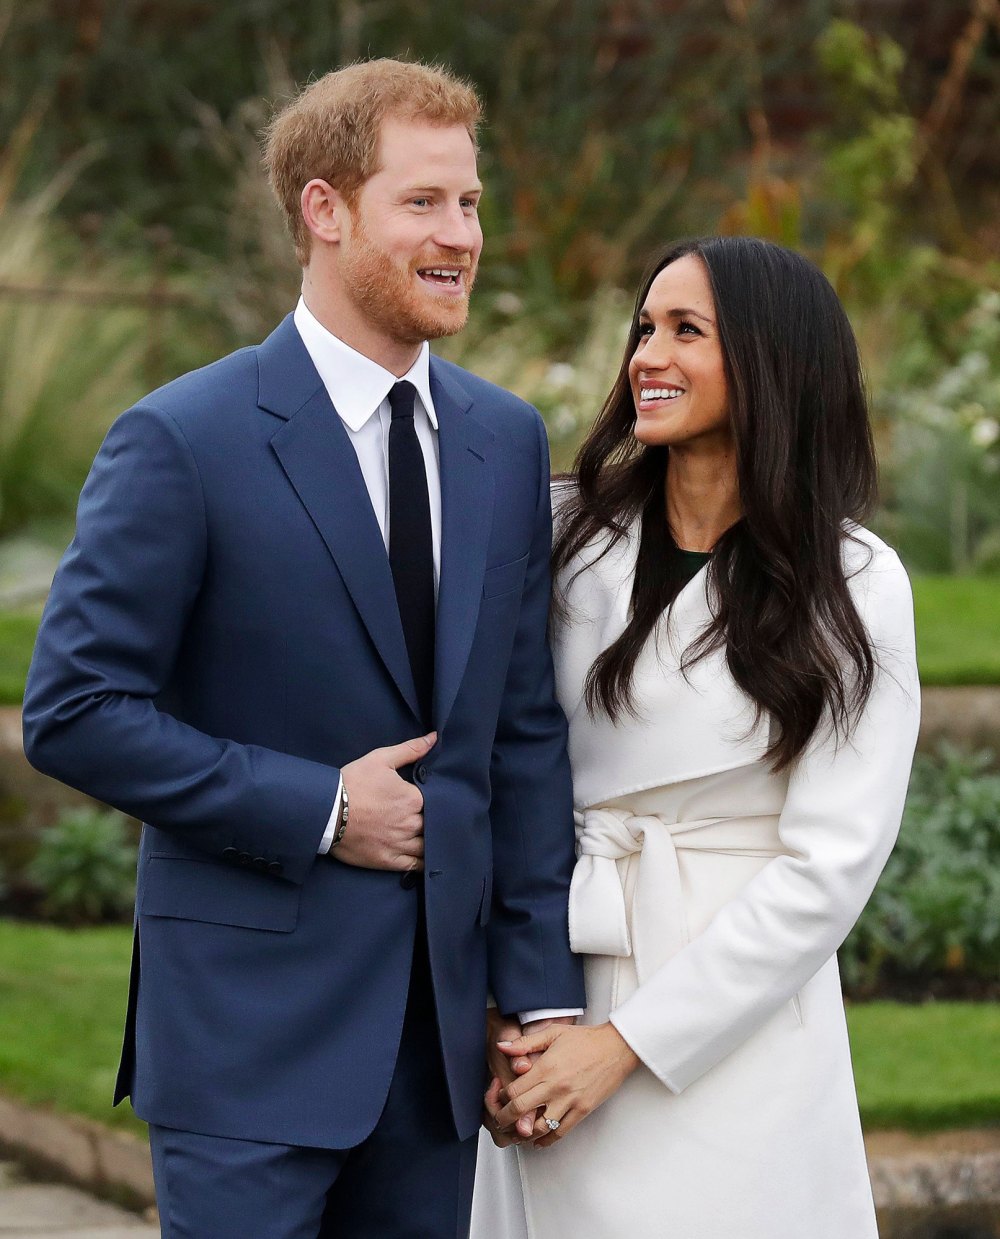 Prince Harry’s Memoir Seemingly ‘Exonerates’ Meghan Markle Allegedly Being to Blame for Prince William Fallout, Says Royal Expert - 034 Britain Royal Engagement, London, United Kingdom - 27 Nov 2017